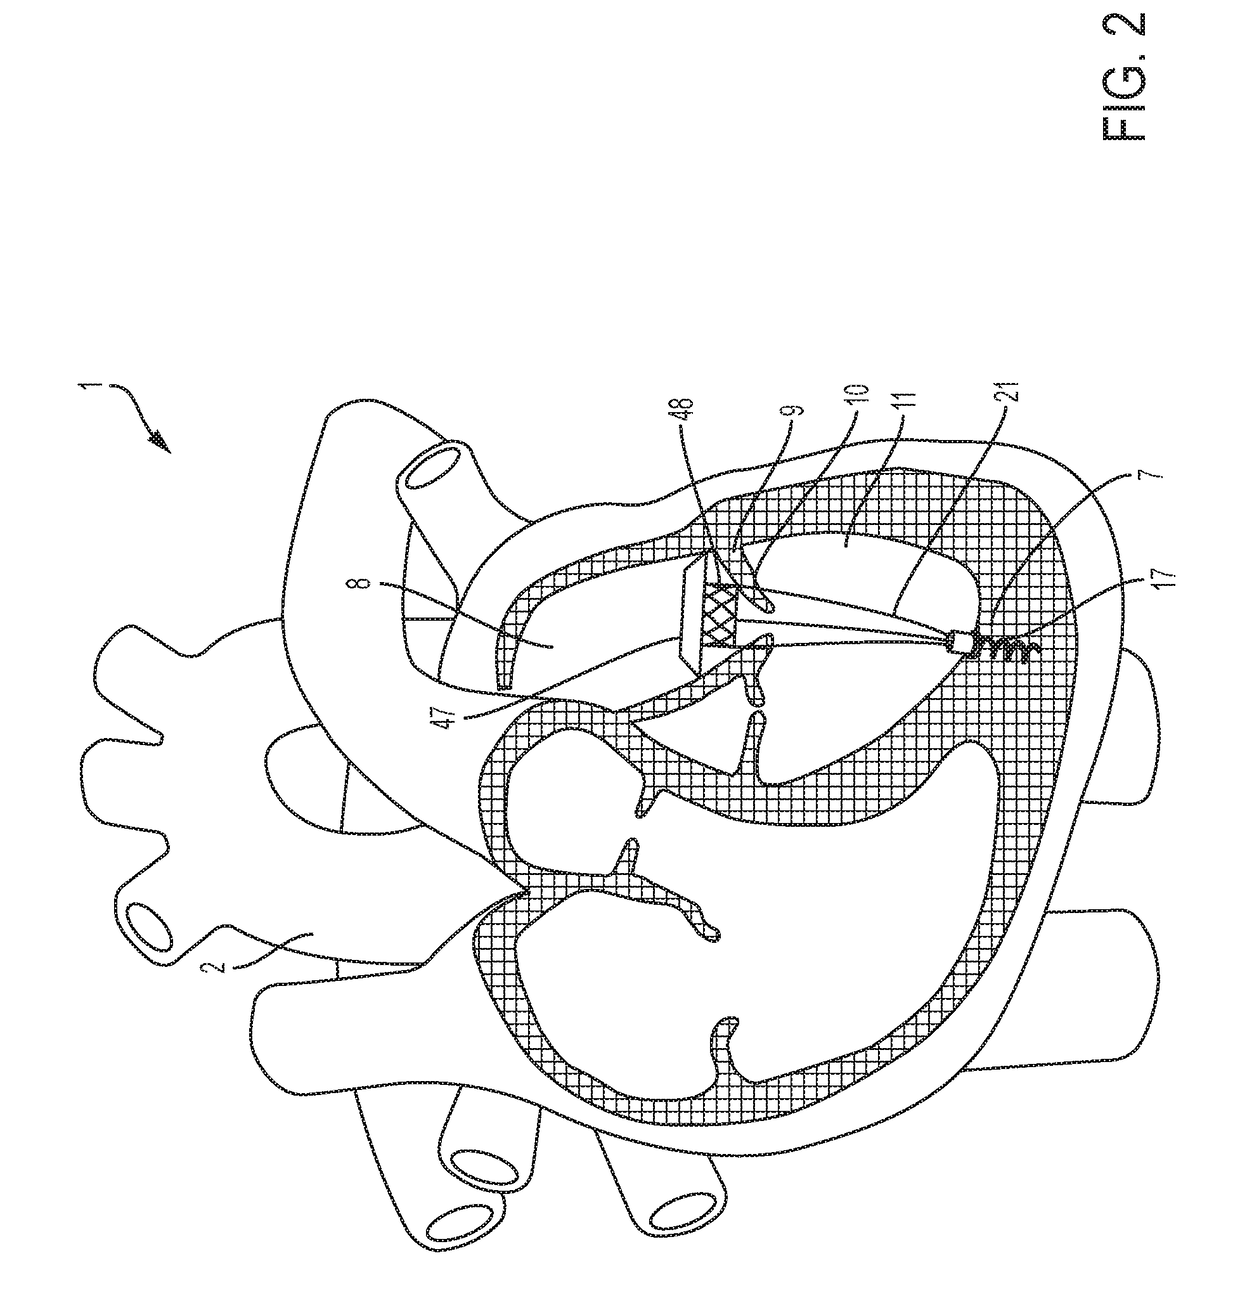 Transcatheter atrial sealing skirt, anchor, and tether and methods of implantation